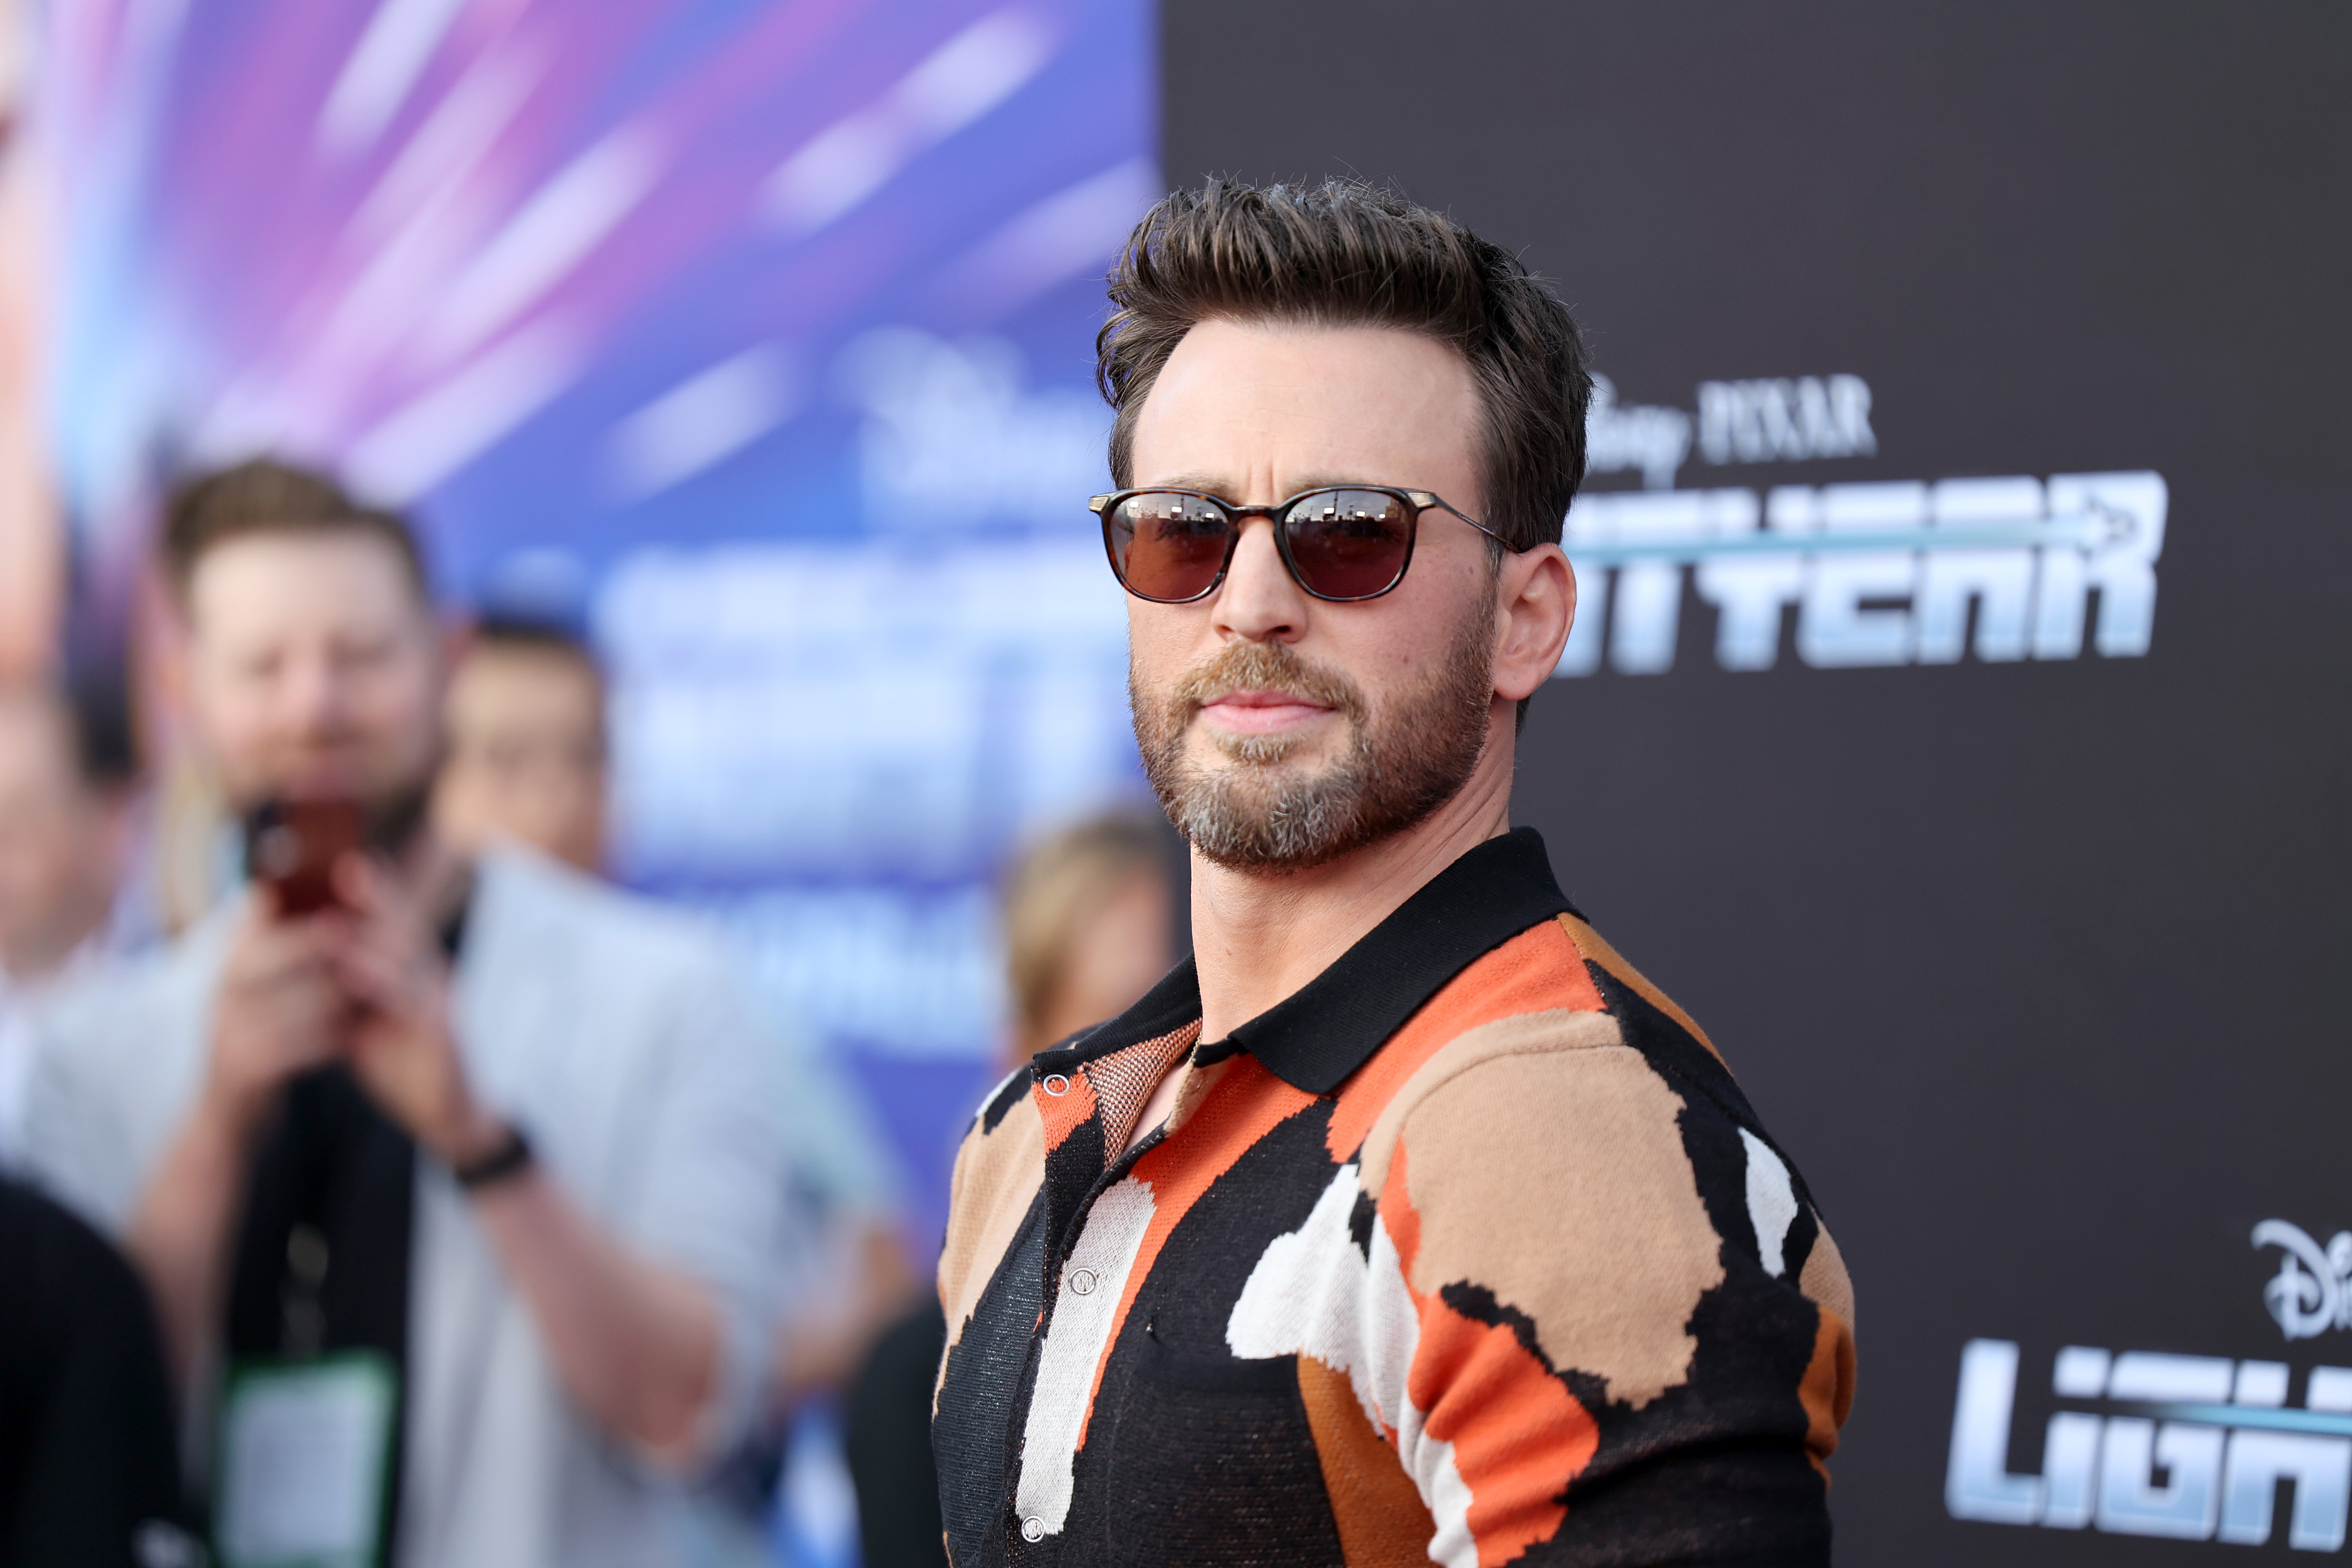 Chris Evans, who famously starred as Captain America in the Marvel Cinematic Universe, wears a black, orange, brown, and white short sleeve collared shirt and sunglasses.